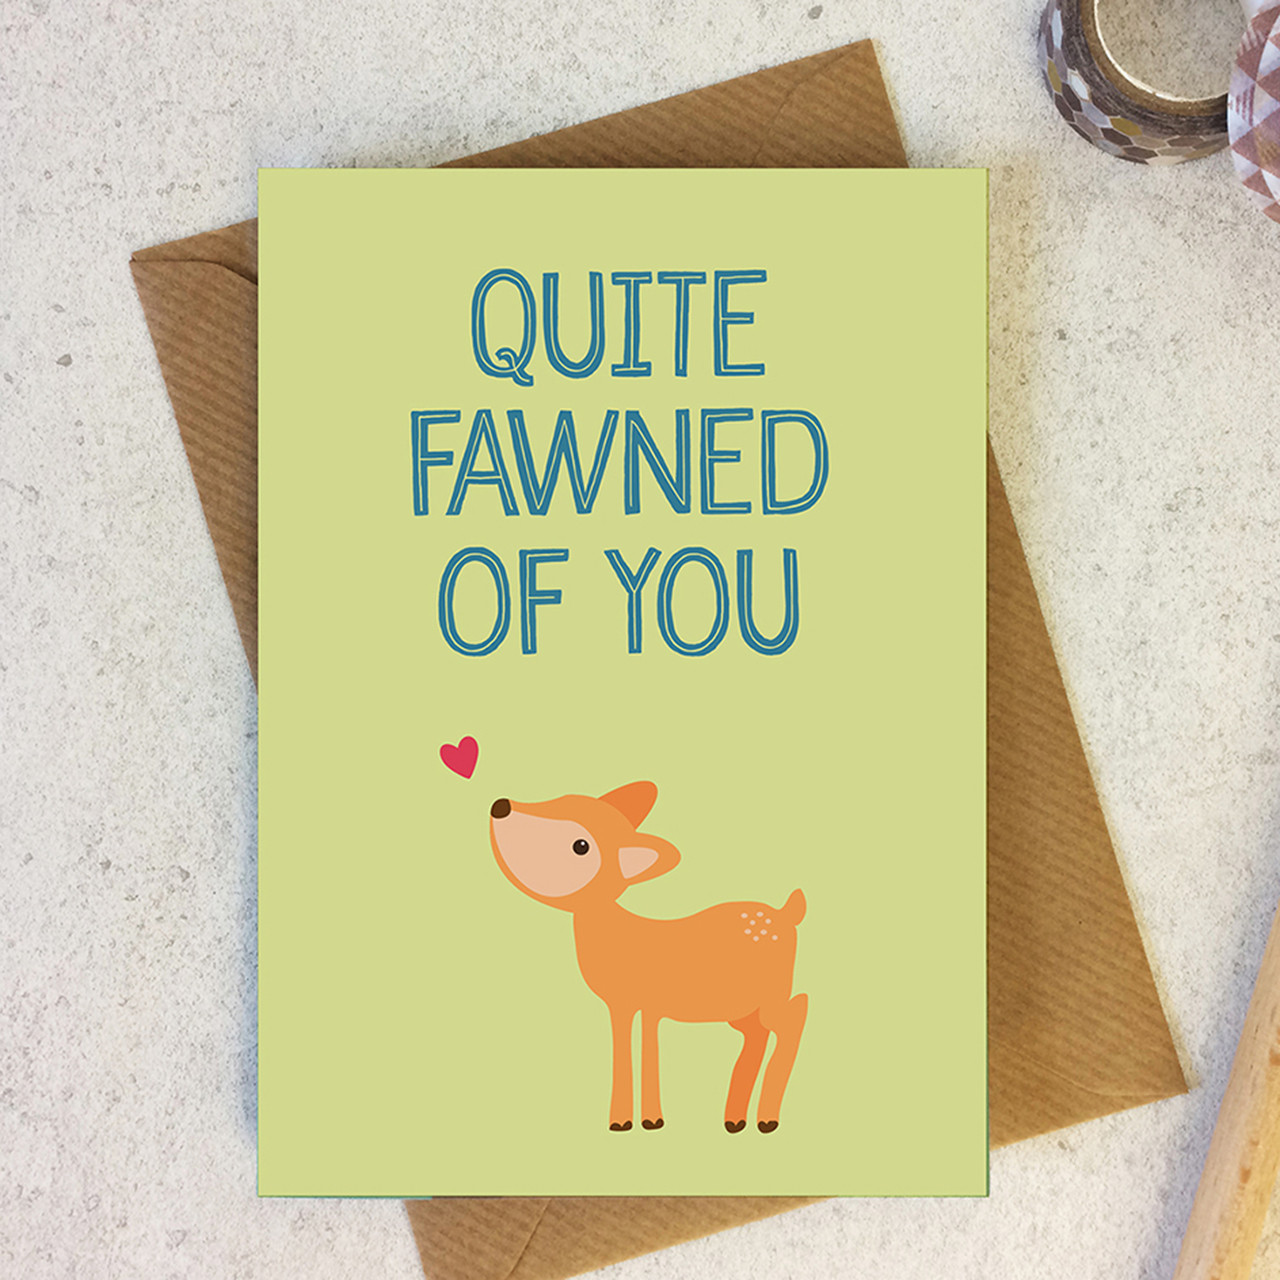 Quite Fawned of You! Funny Valentines Card